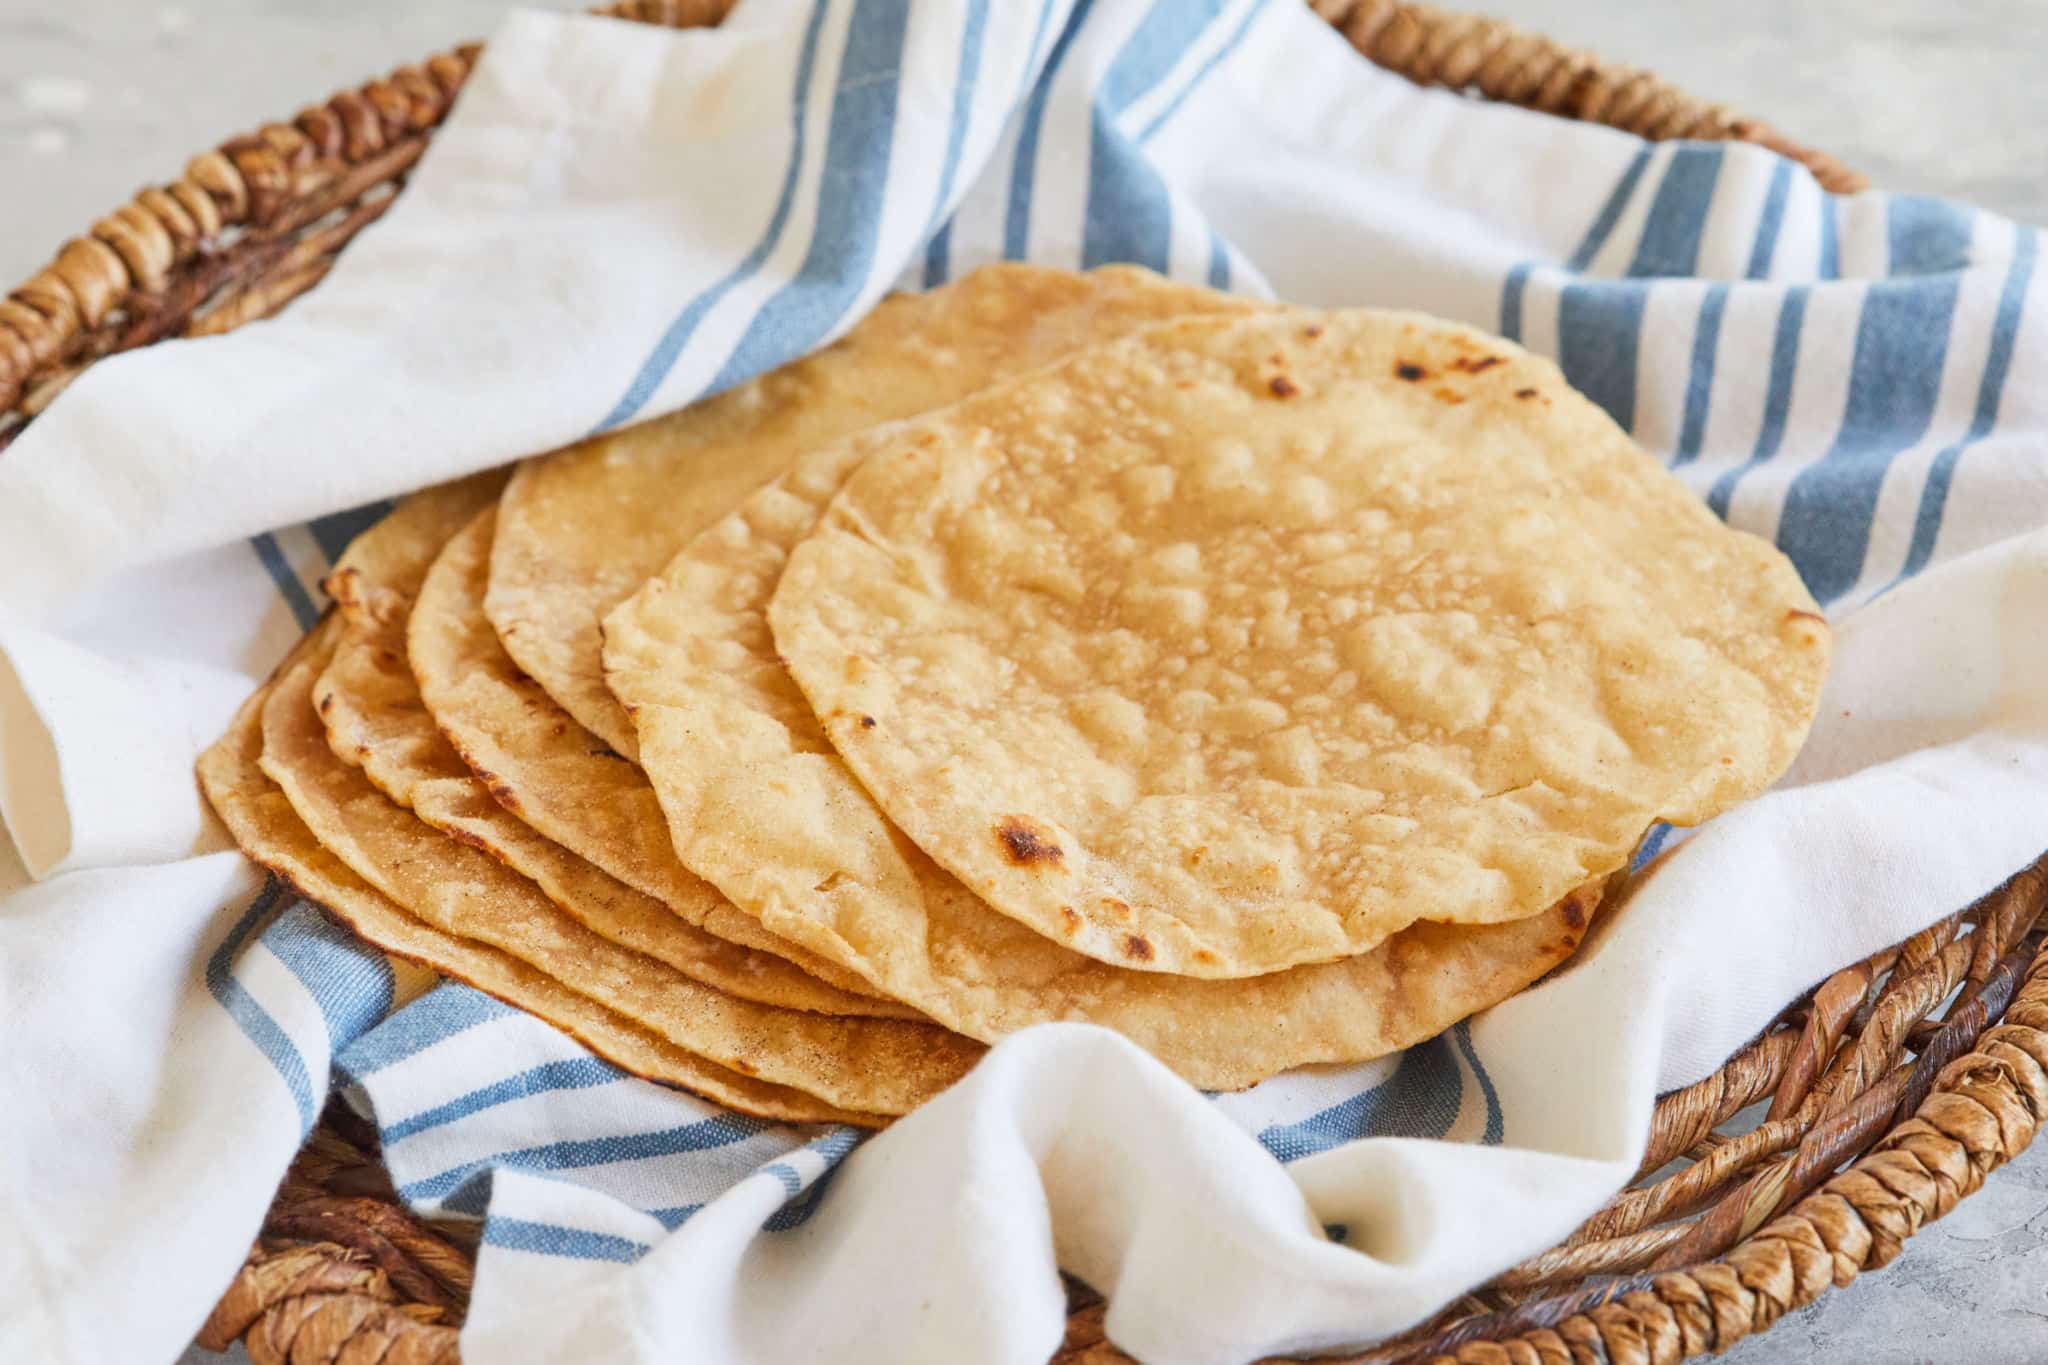 A basket full of traditional Indian roti.